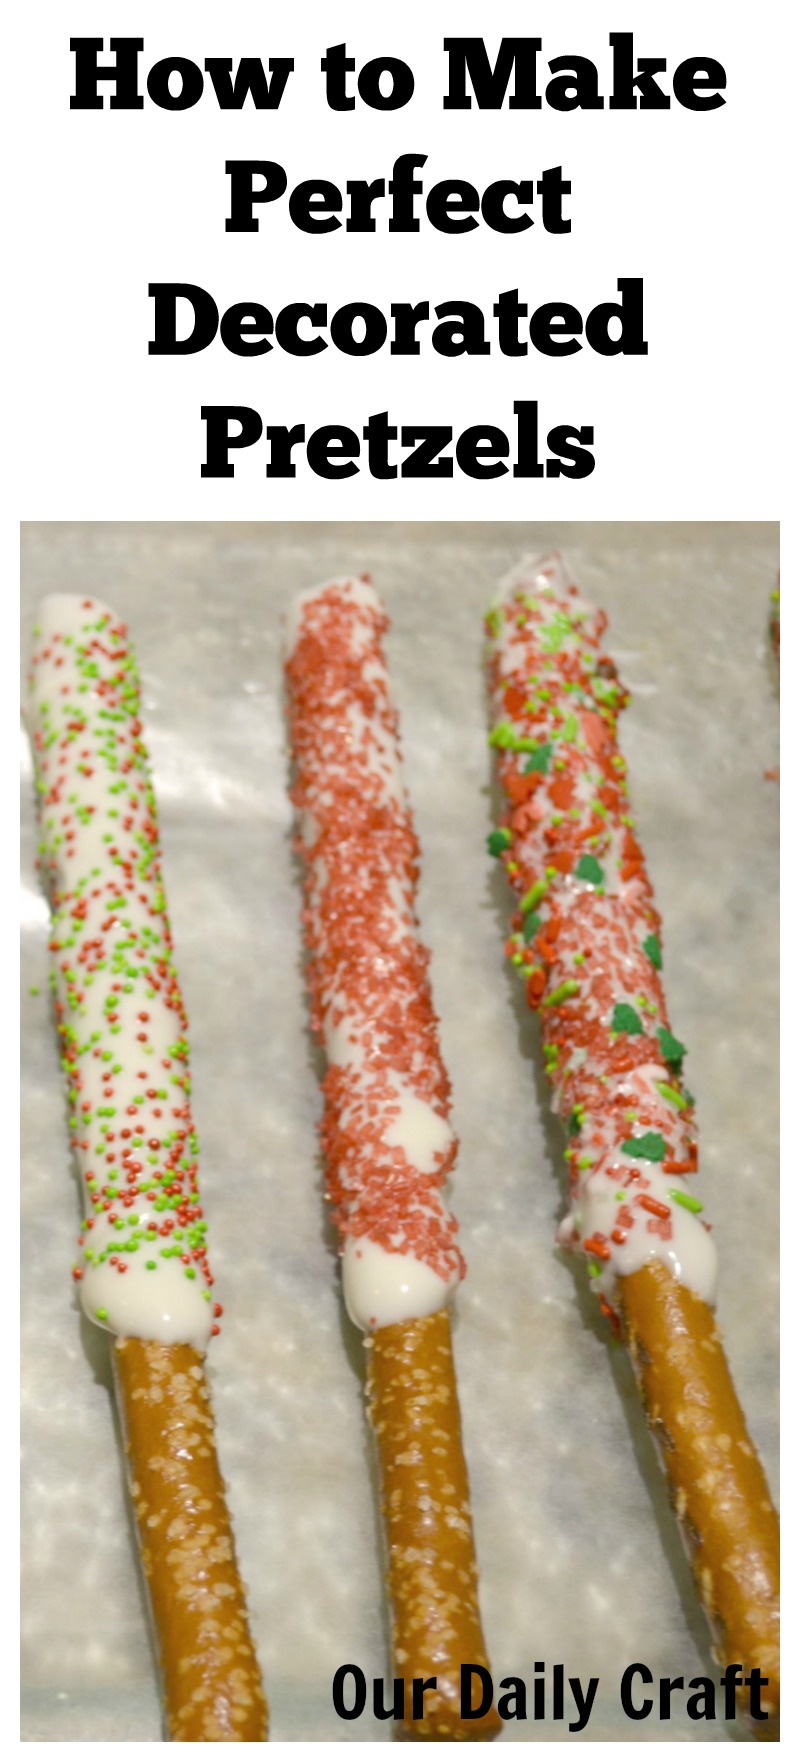 How to Make Perfect Decorated Pretzels